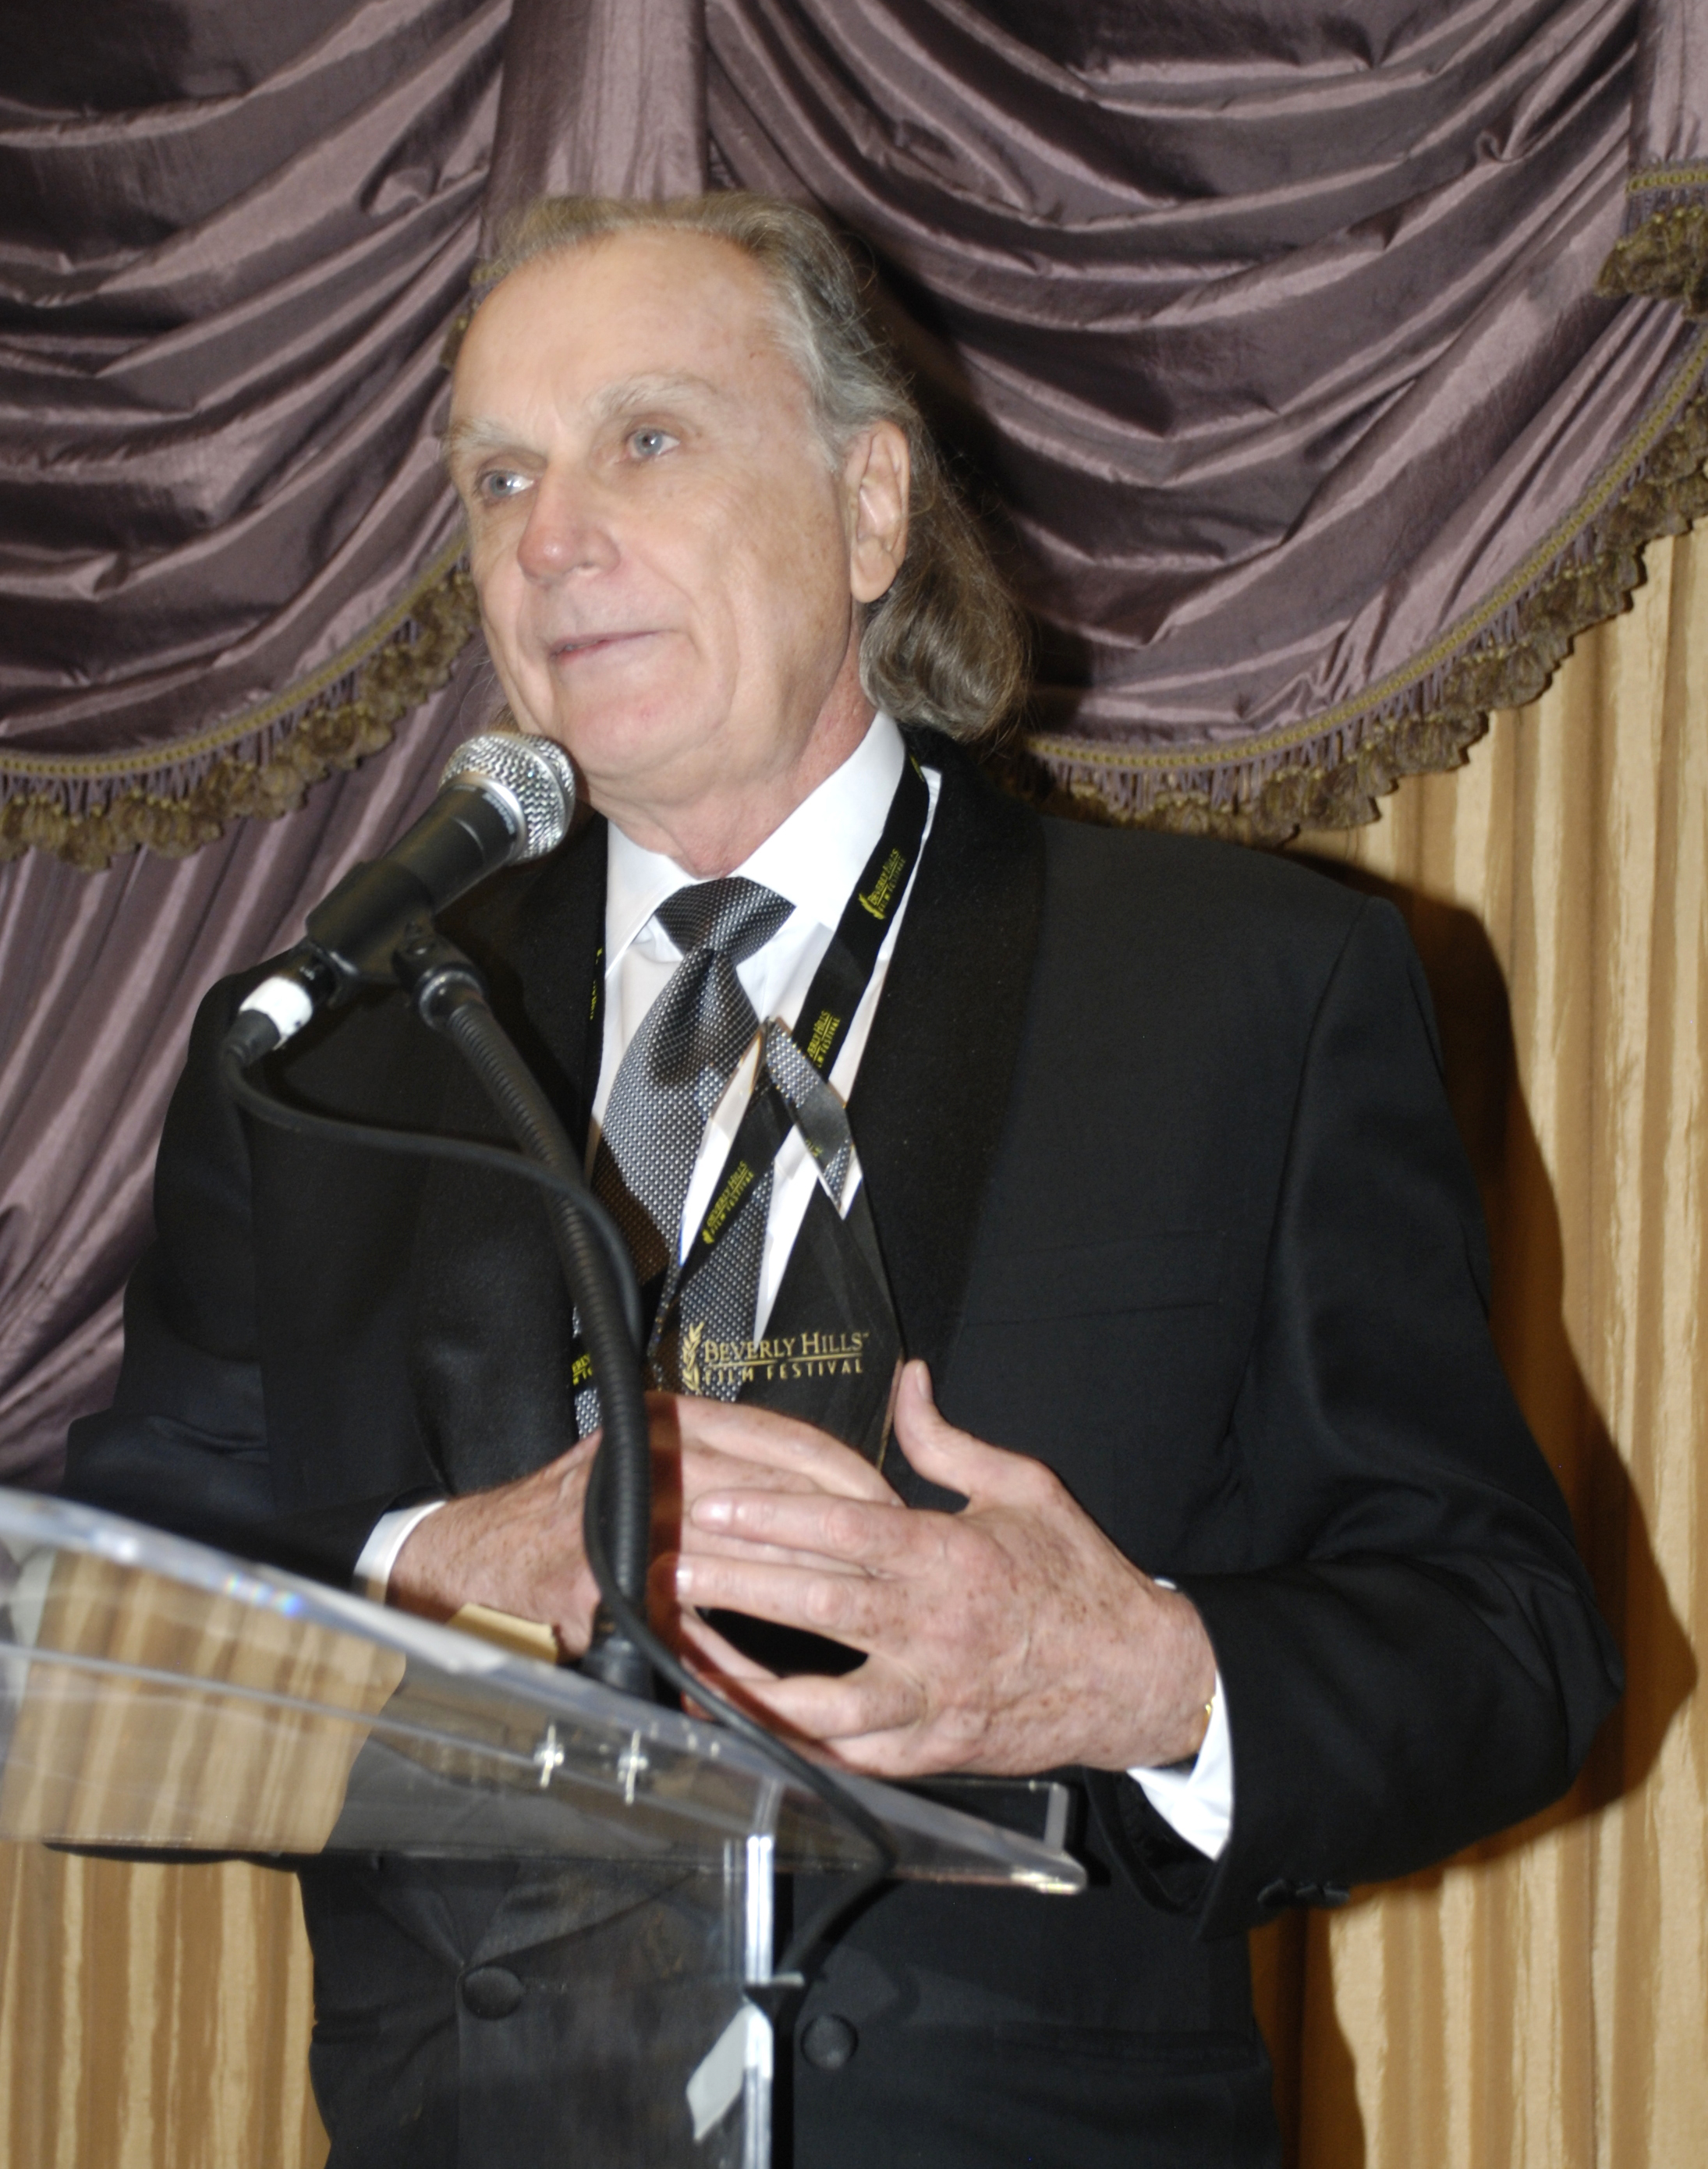 Accepting the Golden Palm Award for Screenwriting (1st Runner Up), 2014 Beverly Hills Film Festival